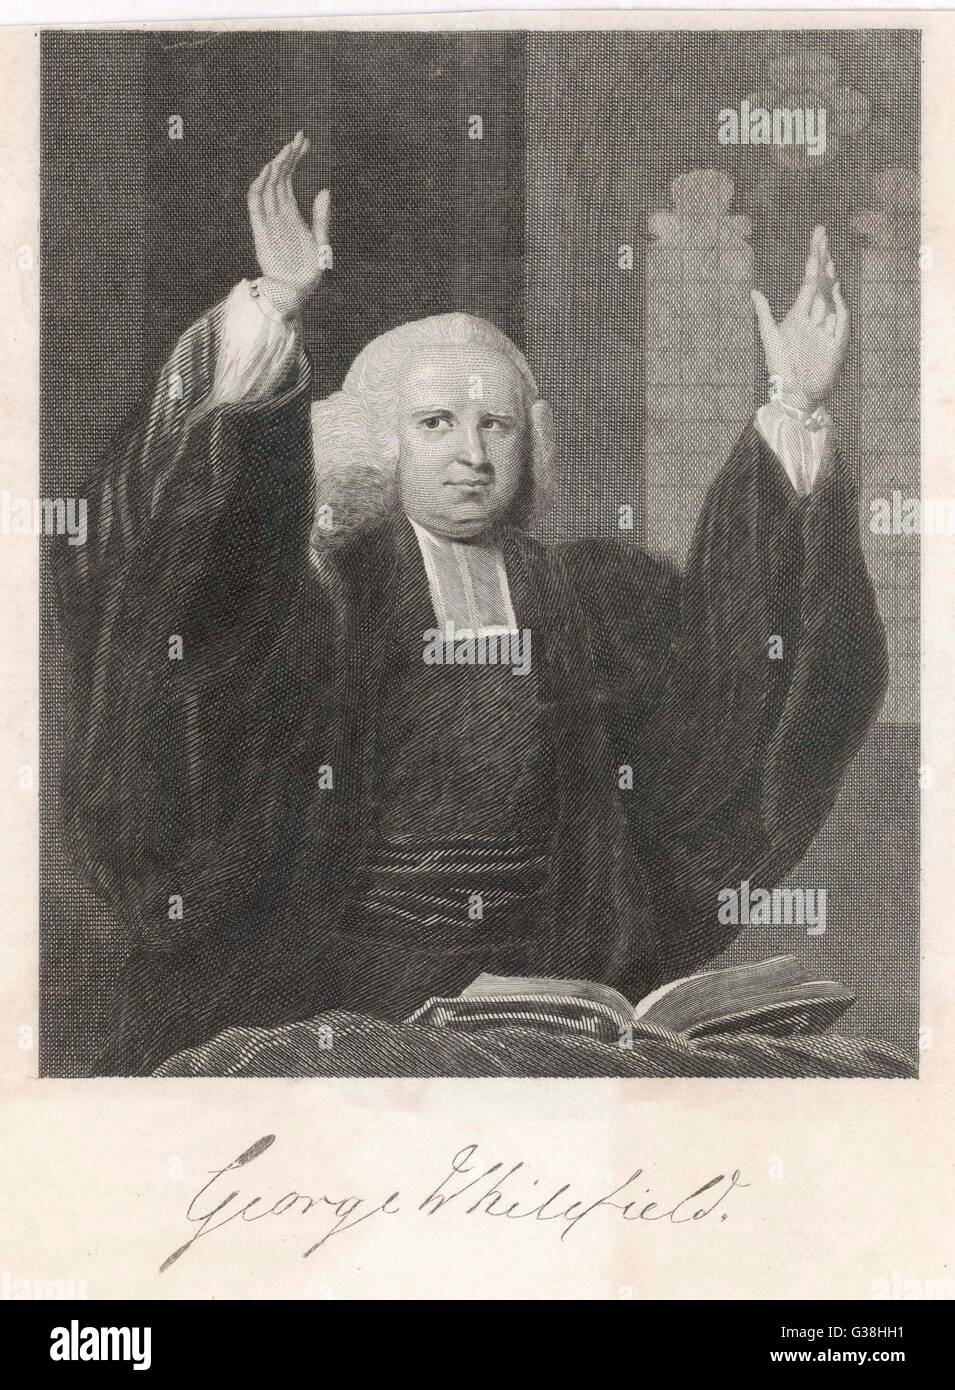 GEORGE WHITEFIELD  Methodist preacher depicted in the act of preaching      Date: 1714 - 1770 Stock Photo